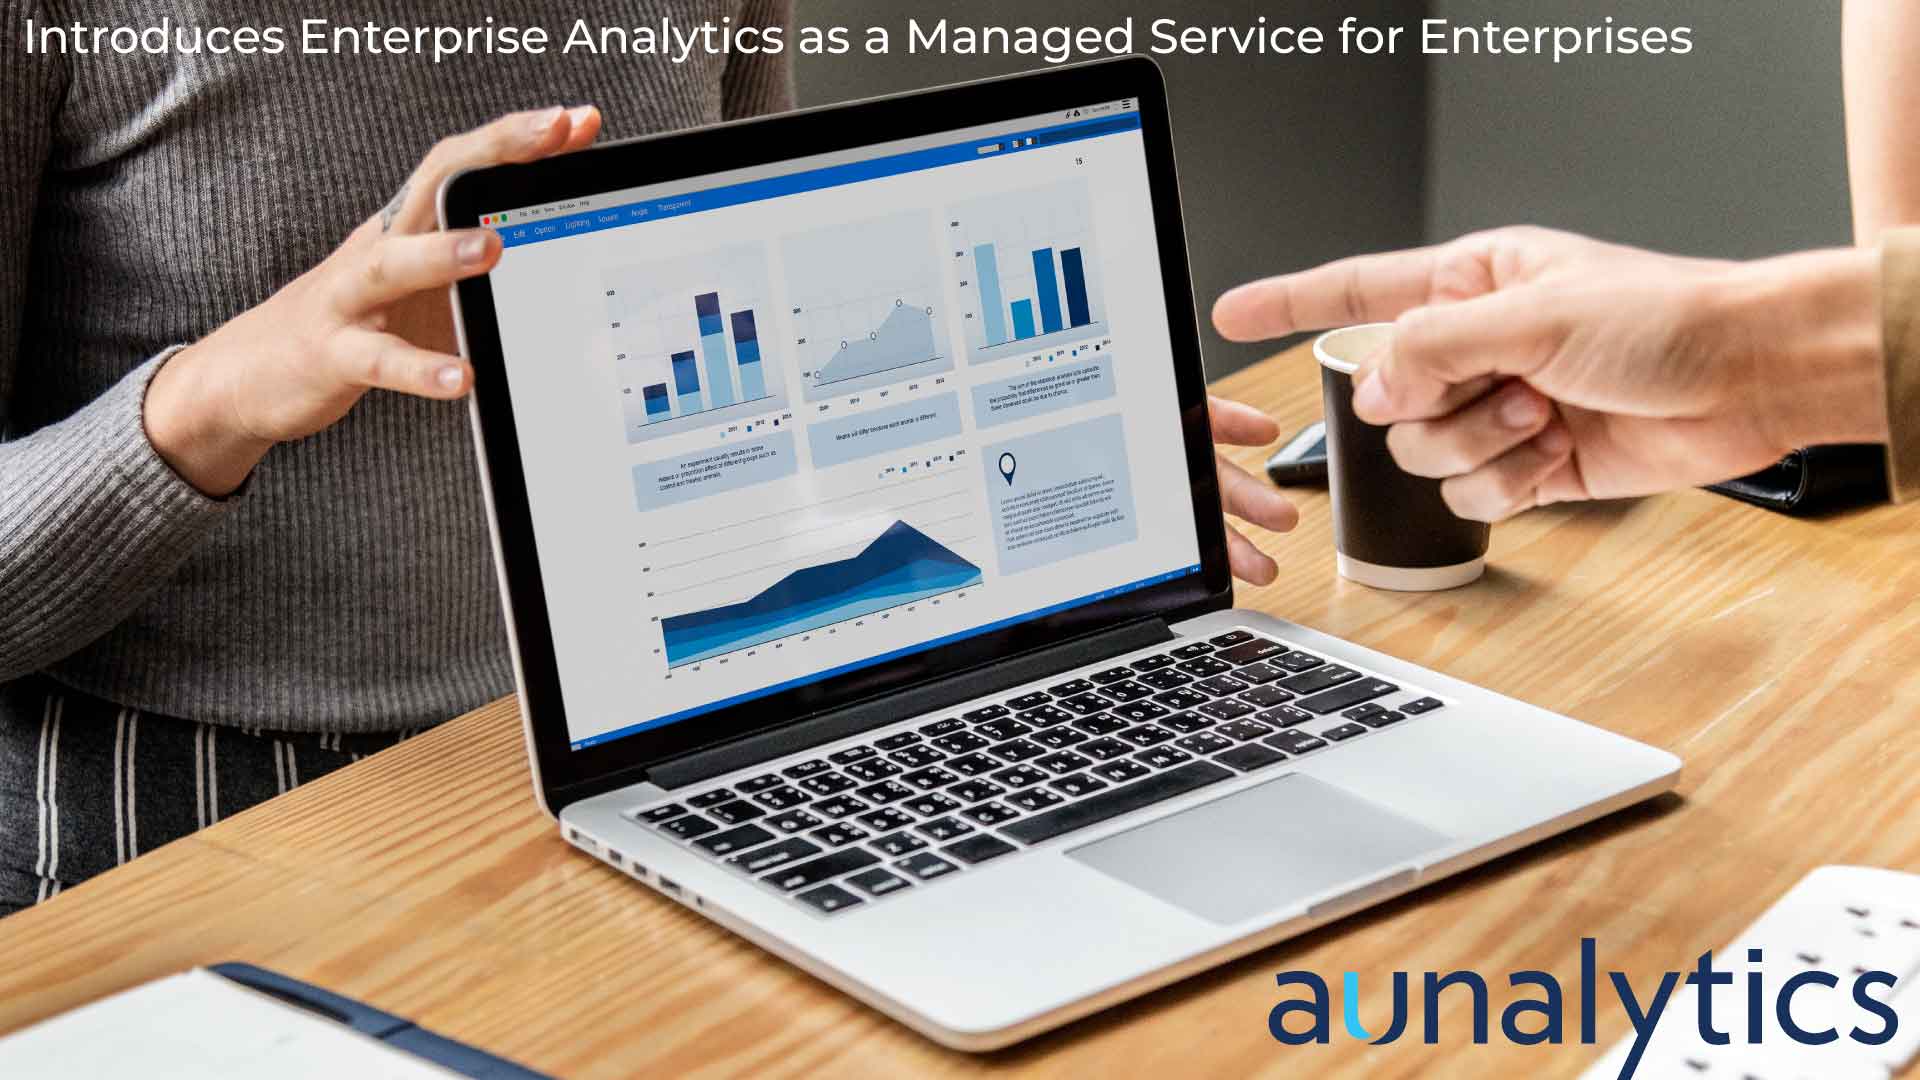 Aunalytics Introduces Enterprise Analytics as a Managed Service for Enterprises in Secondary and Tertiary Markets